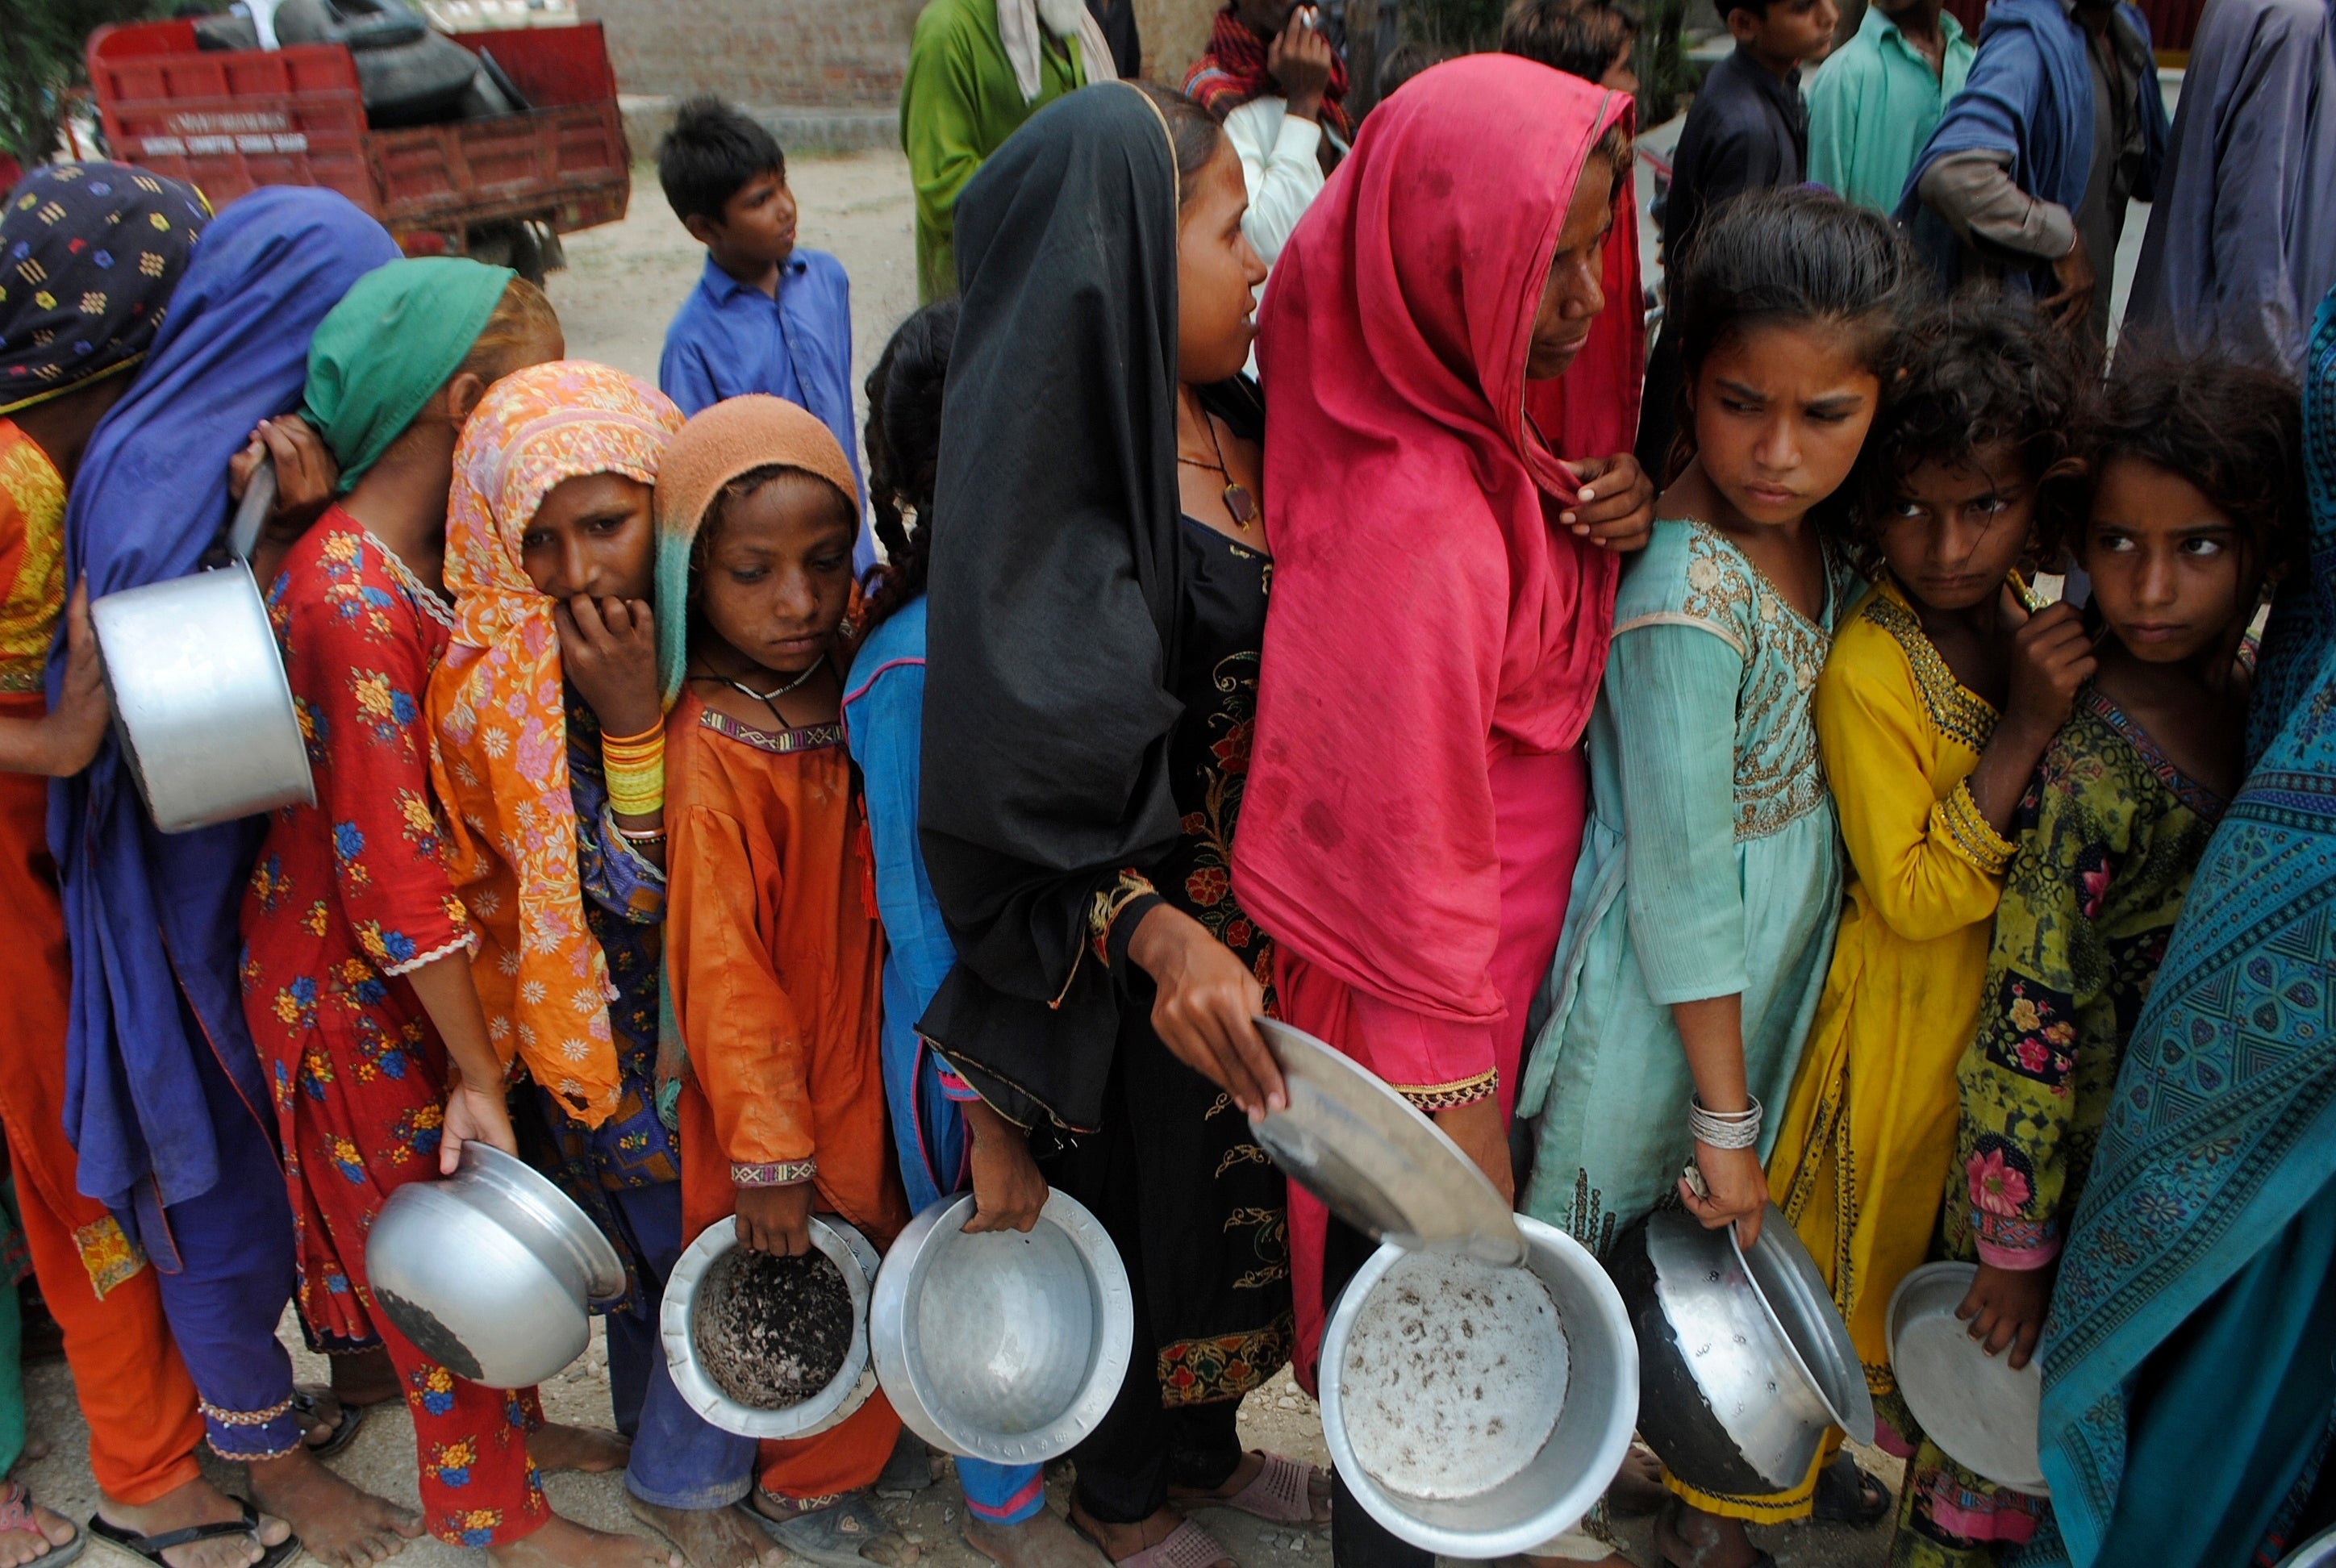 Victims of the floods in Pakistan queue for aid